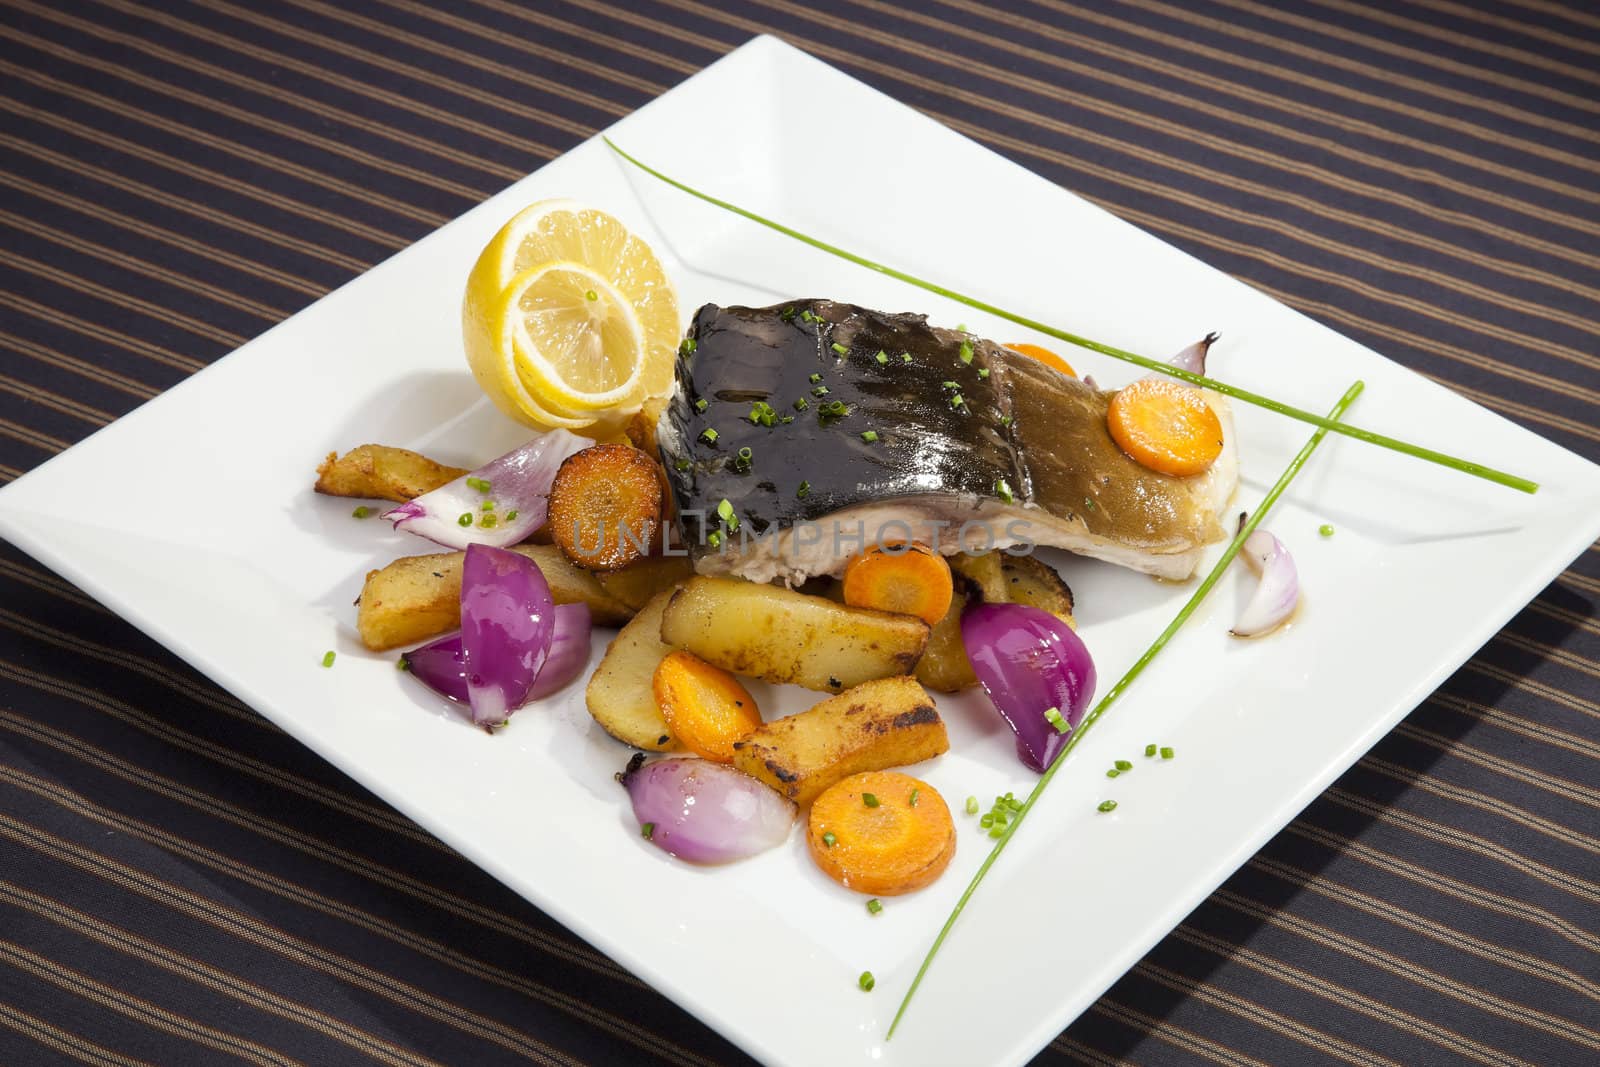 Grilled carp with vegetable garnish by hanusst